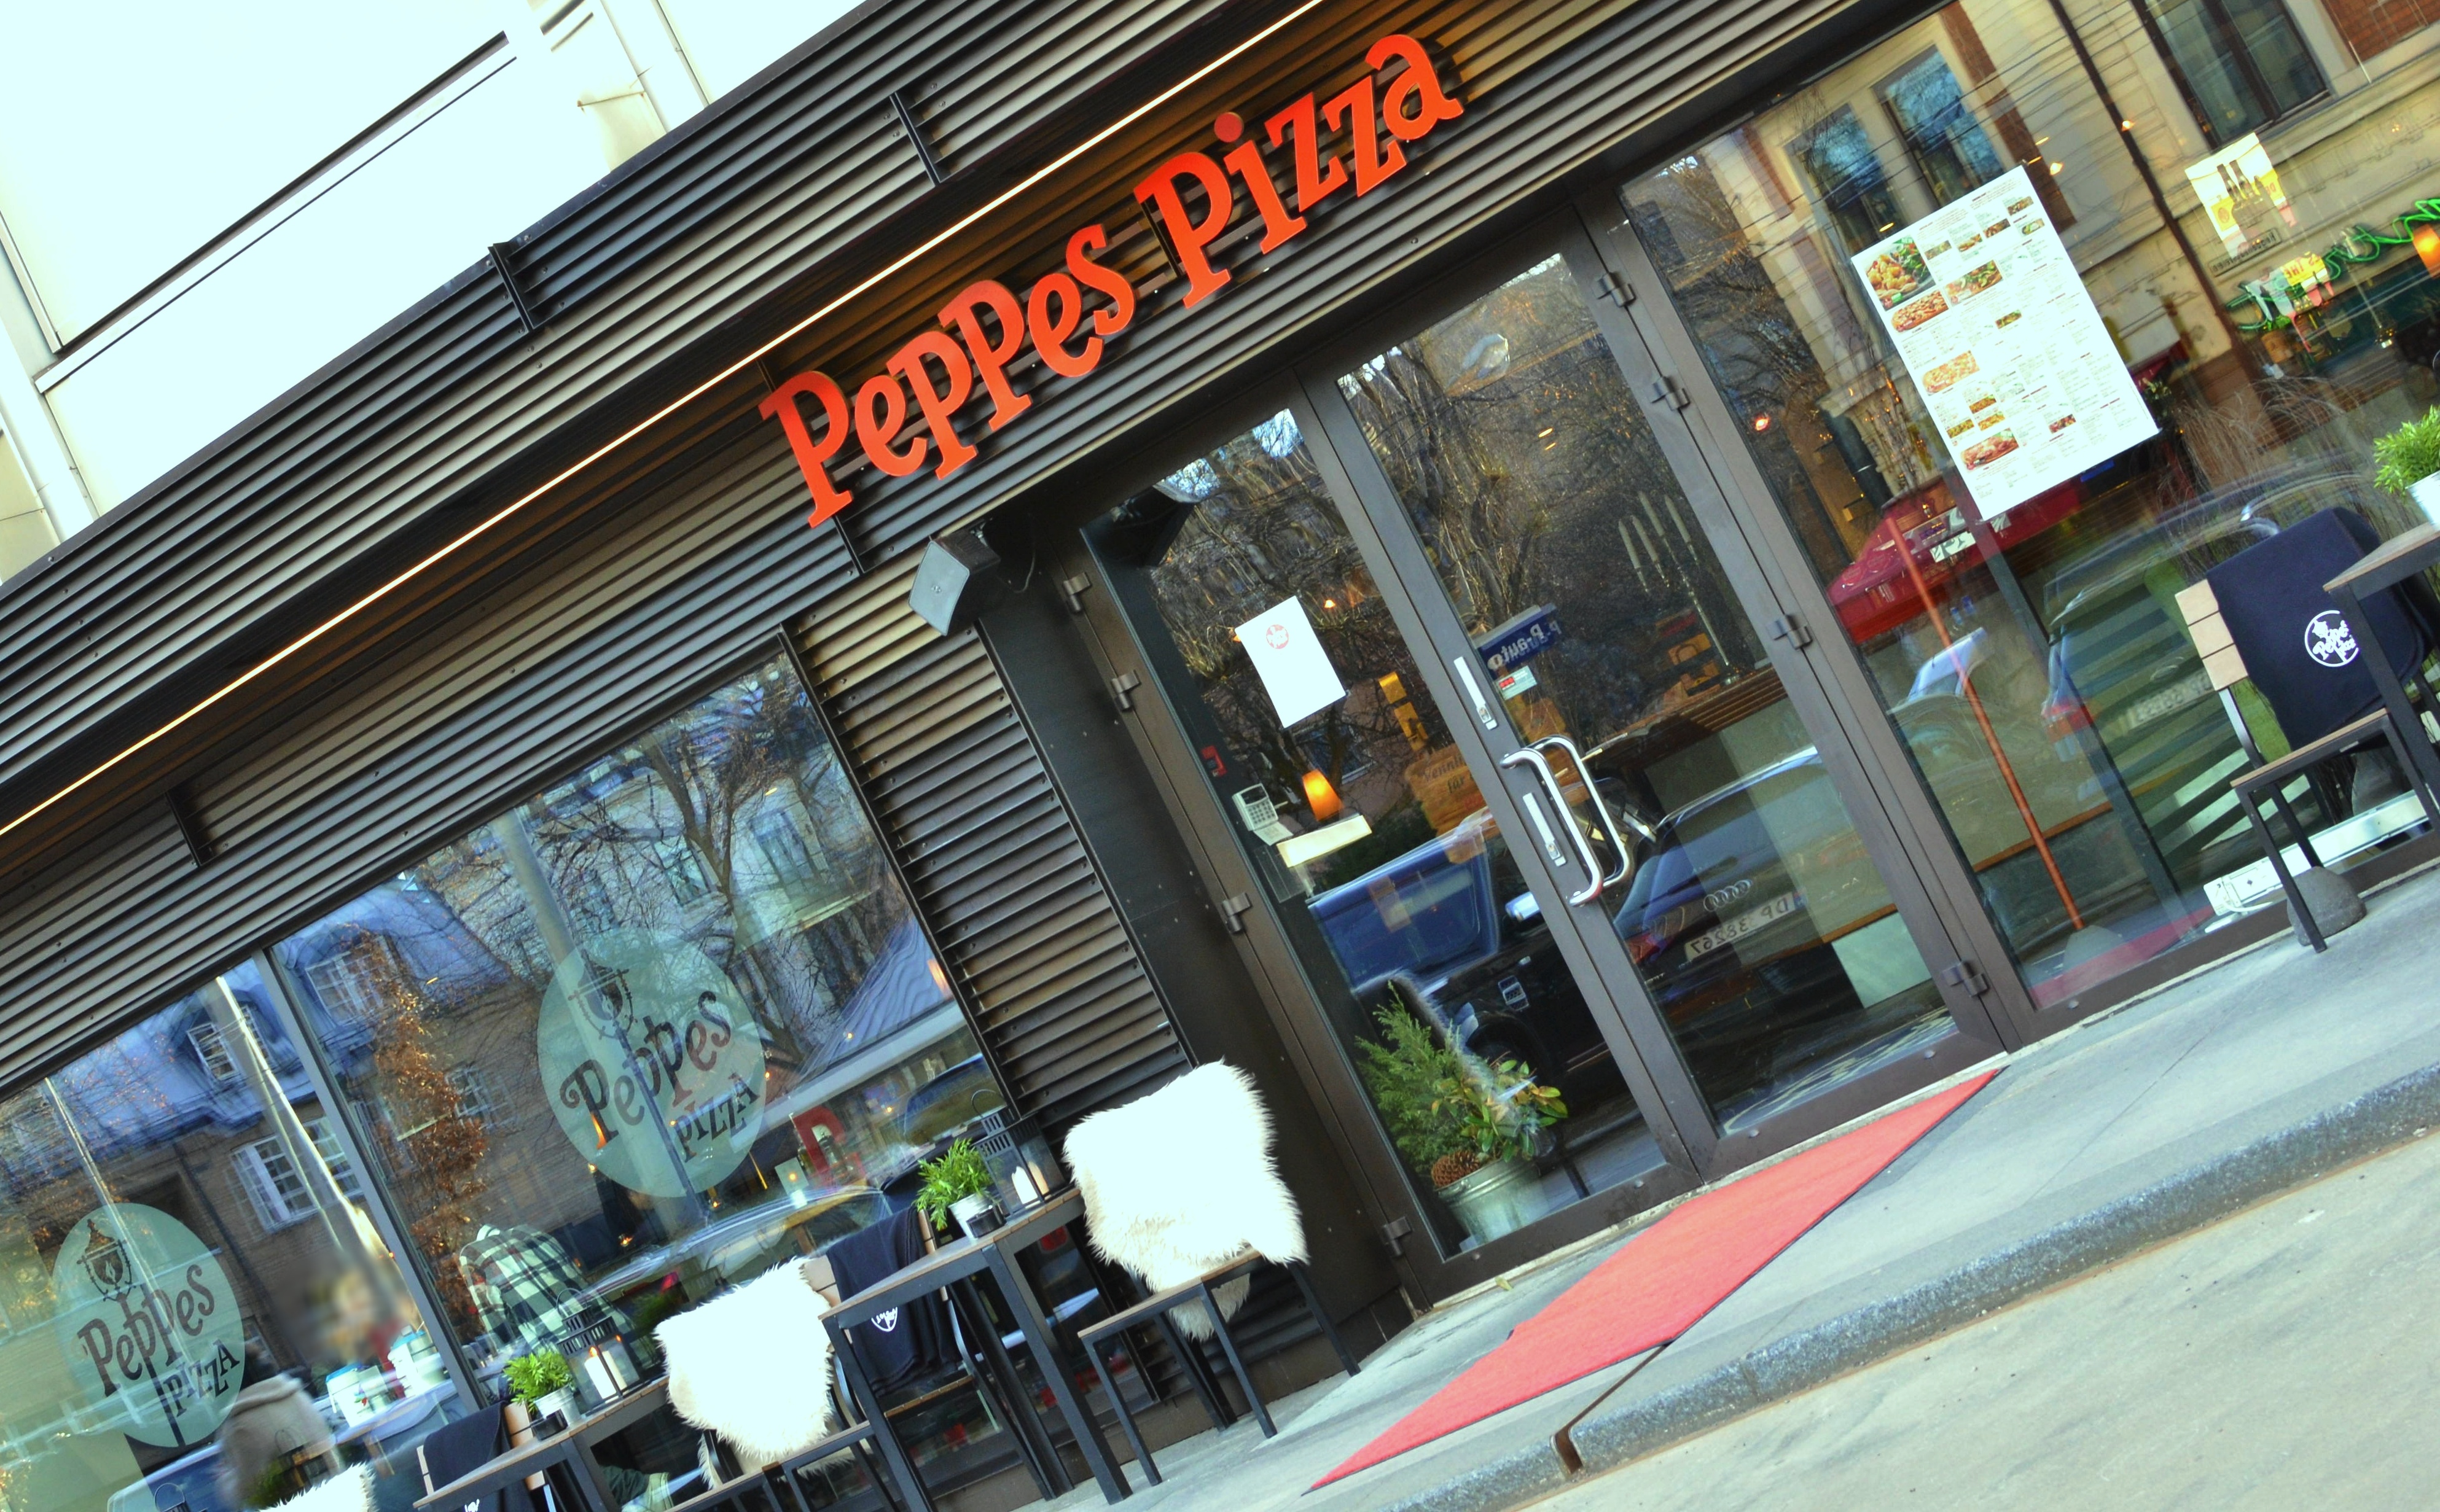 Peppes pizzeria